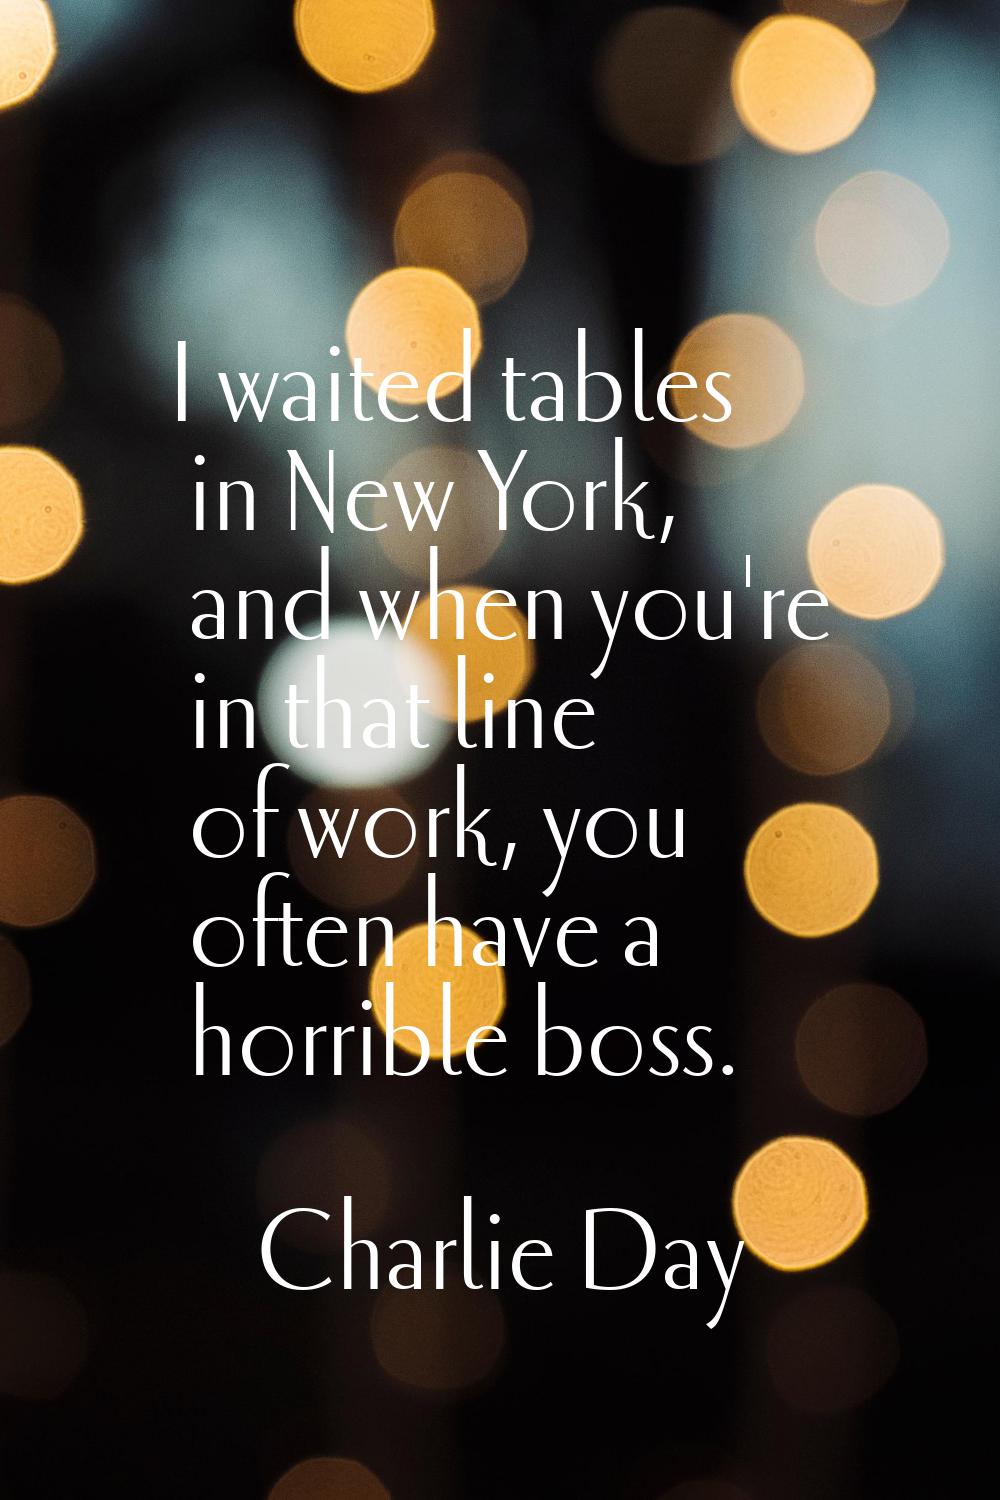 I waited tables in New York, and when you're in that line of work, you often have a horrible boss.